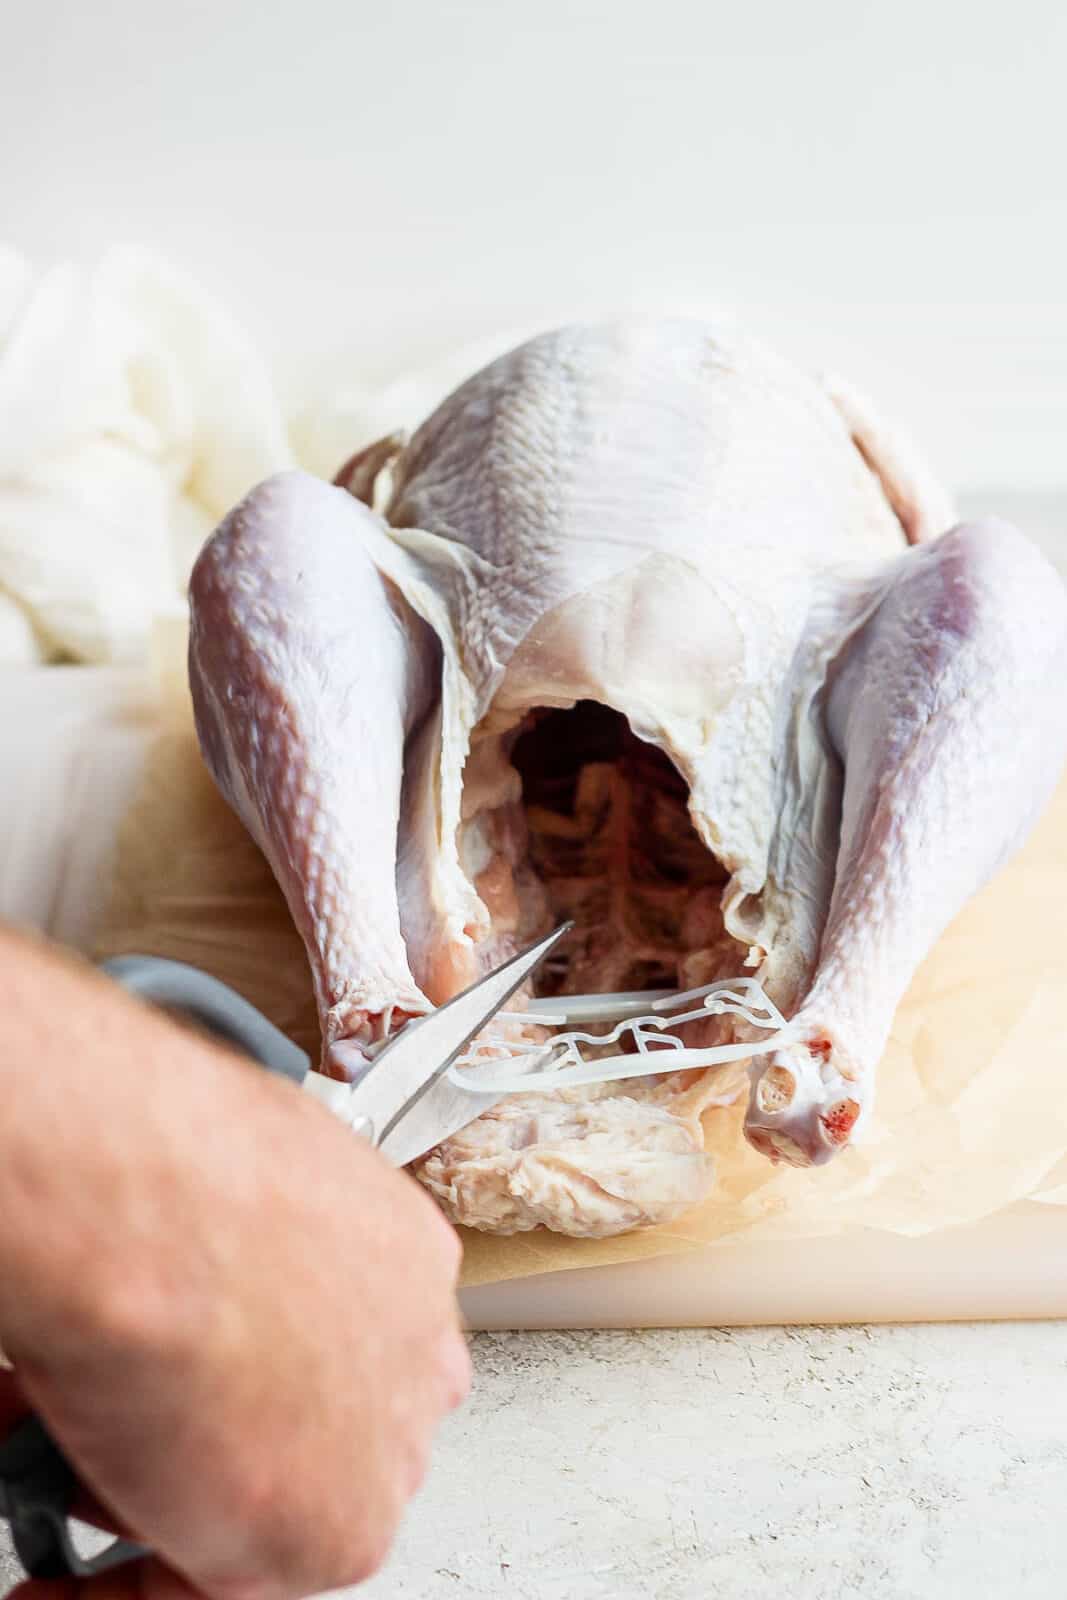 The hock handle being removed from a whole turkey.